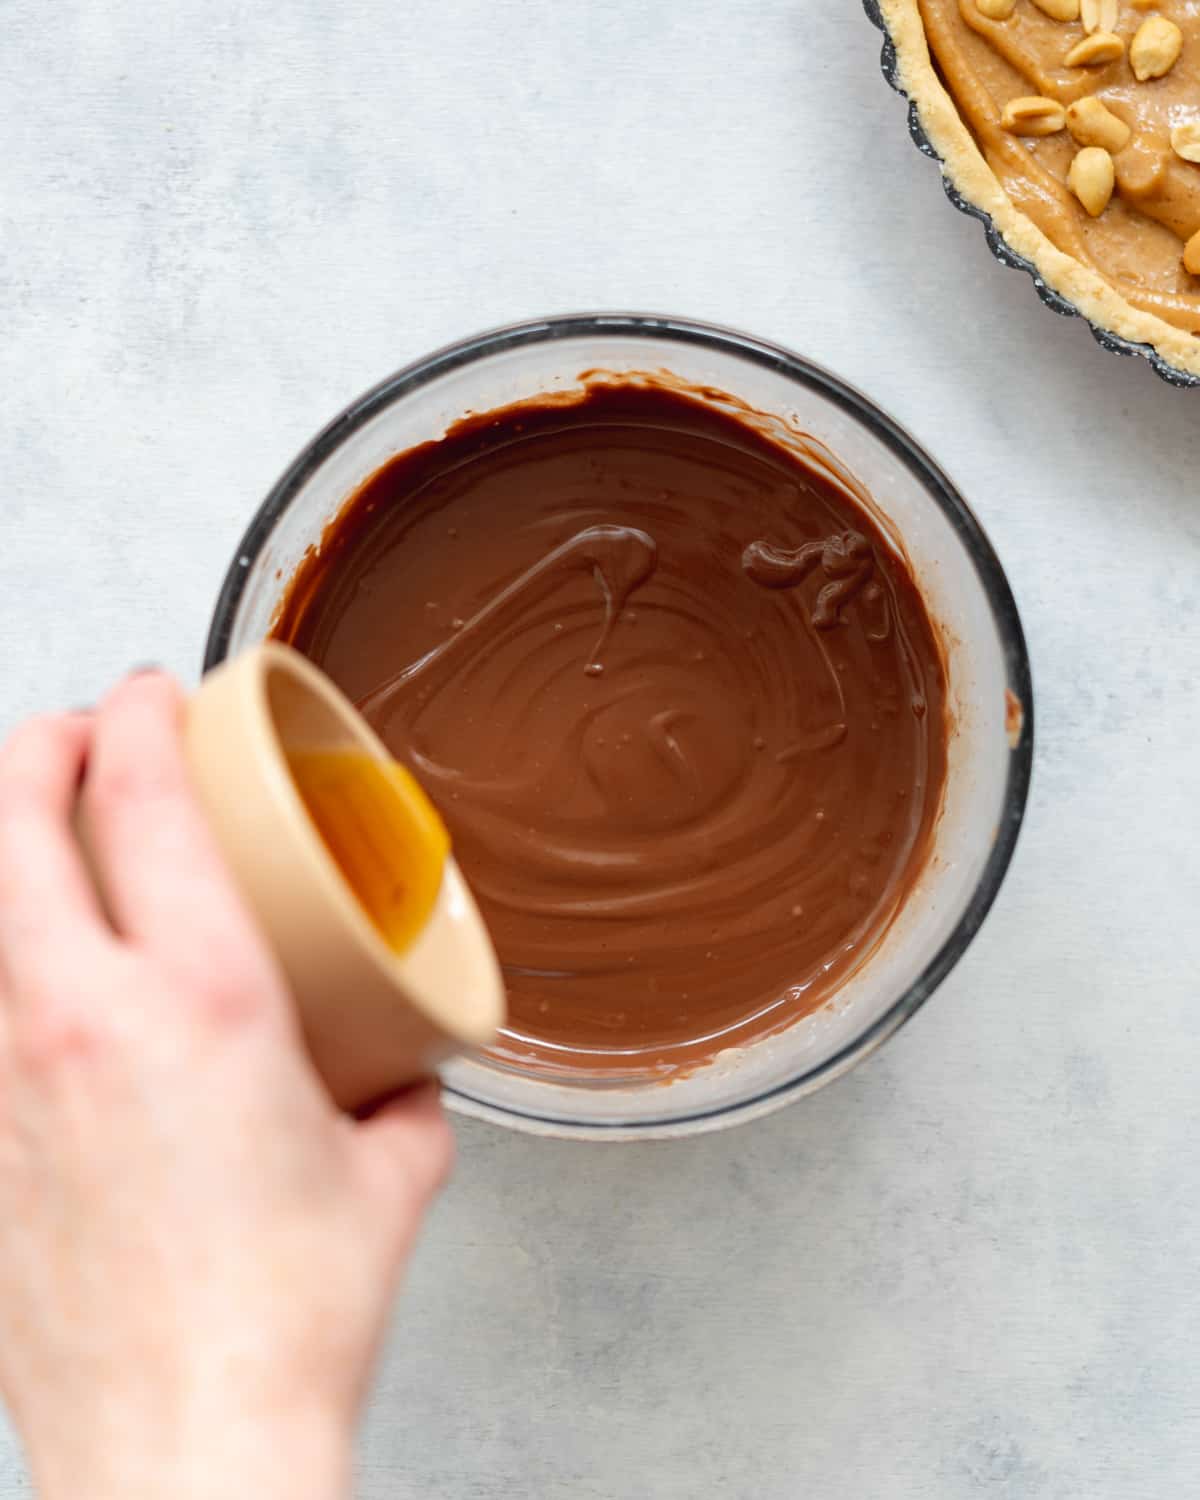 pouring maple syrup into a bowl with melted chocolate.